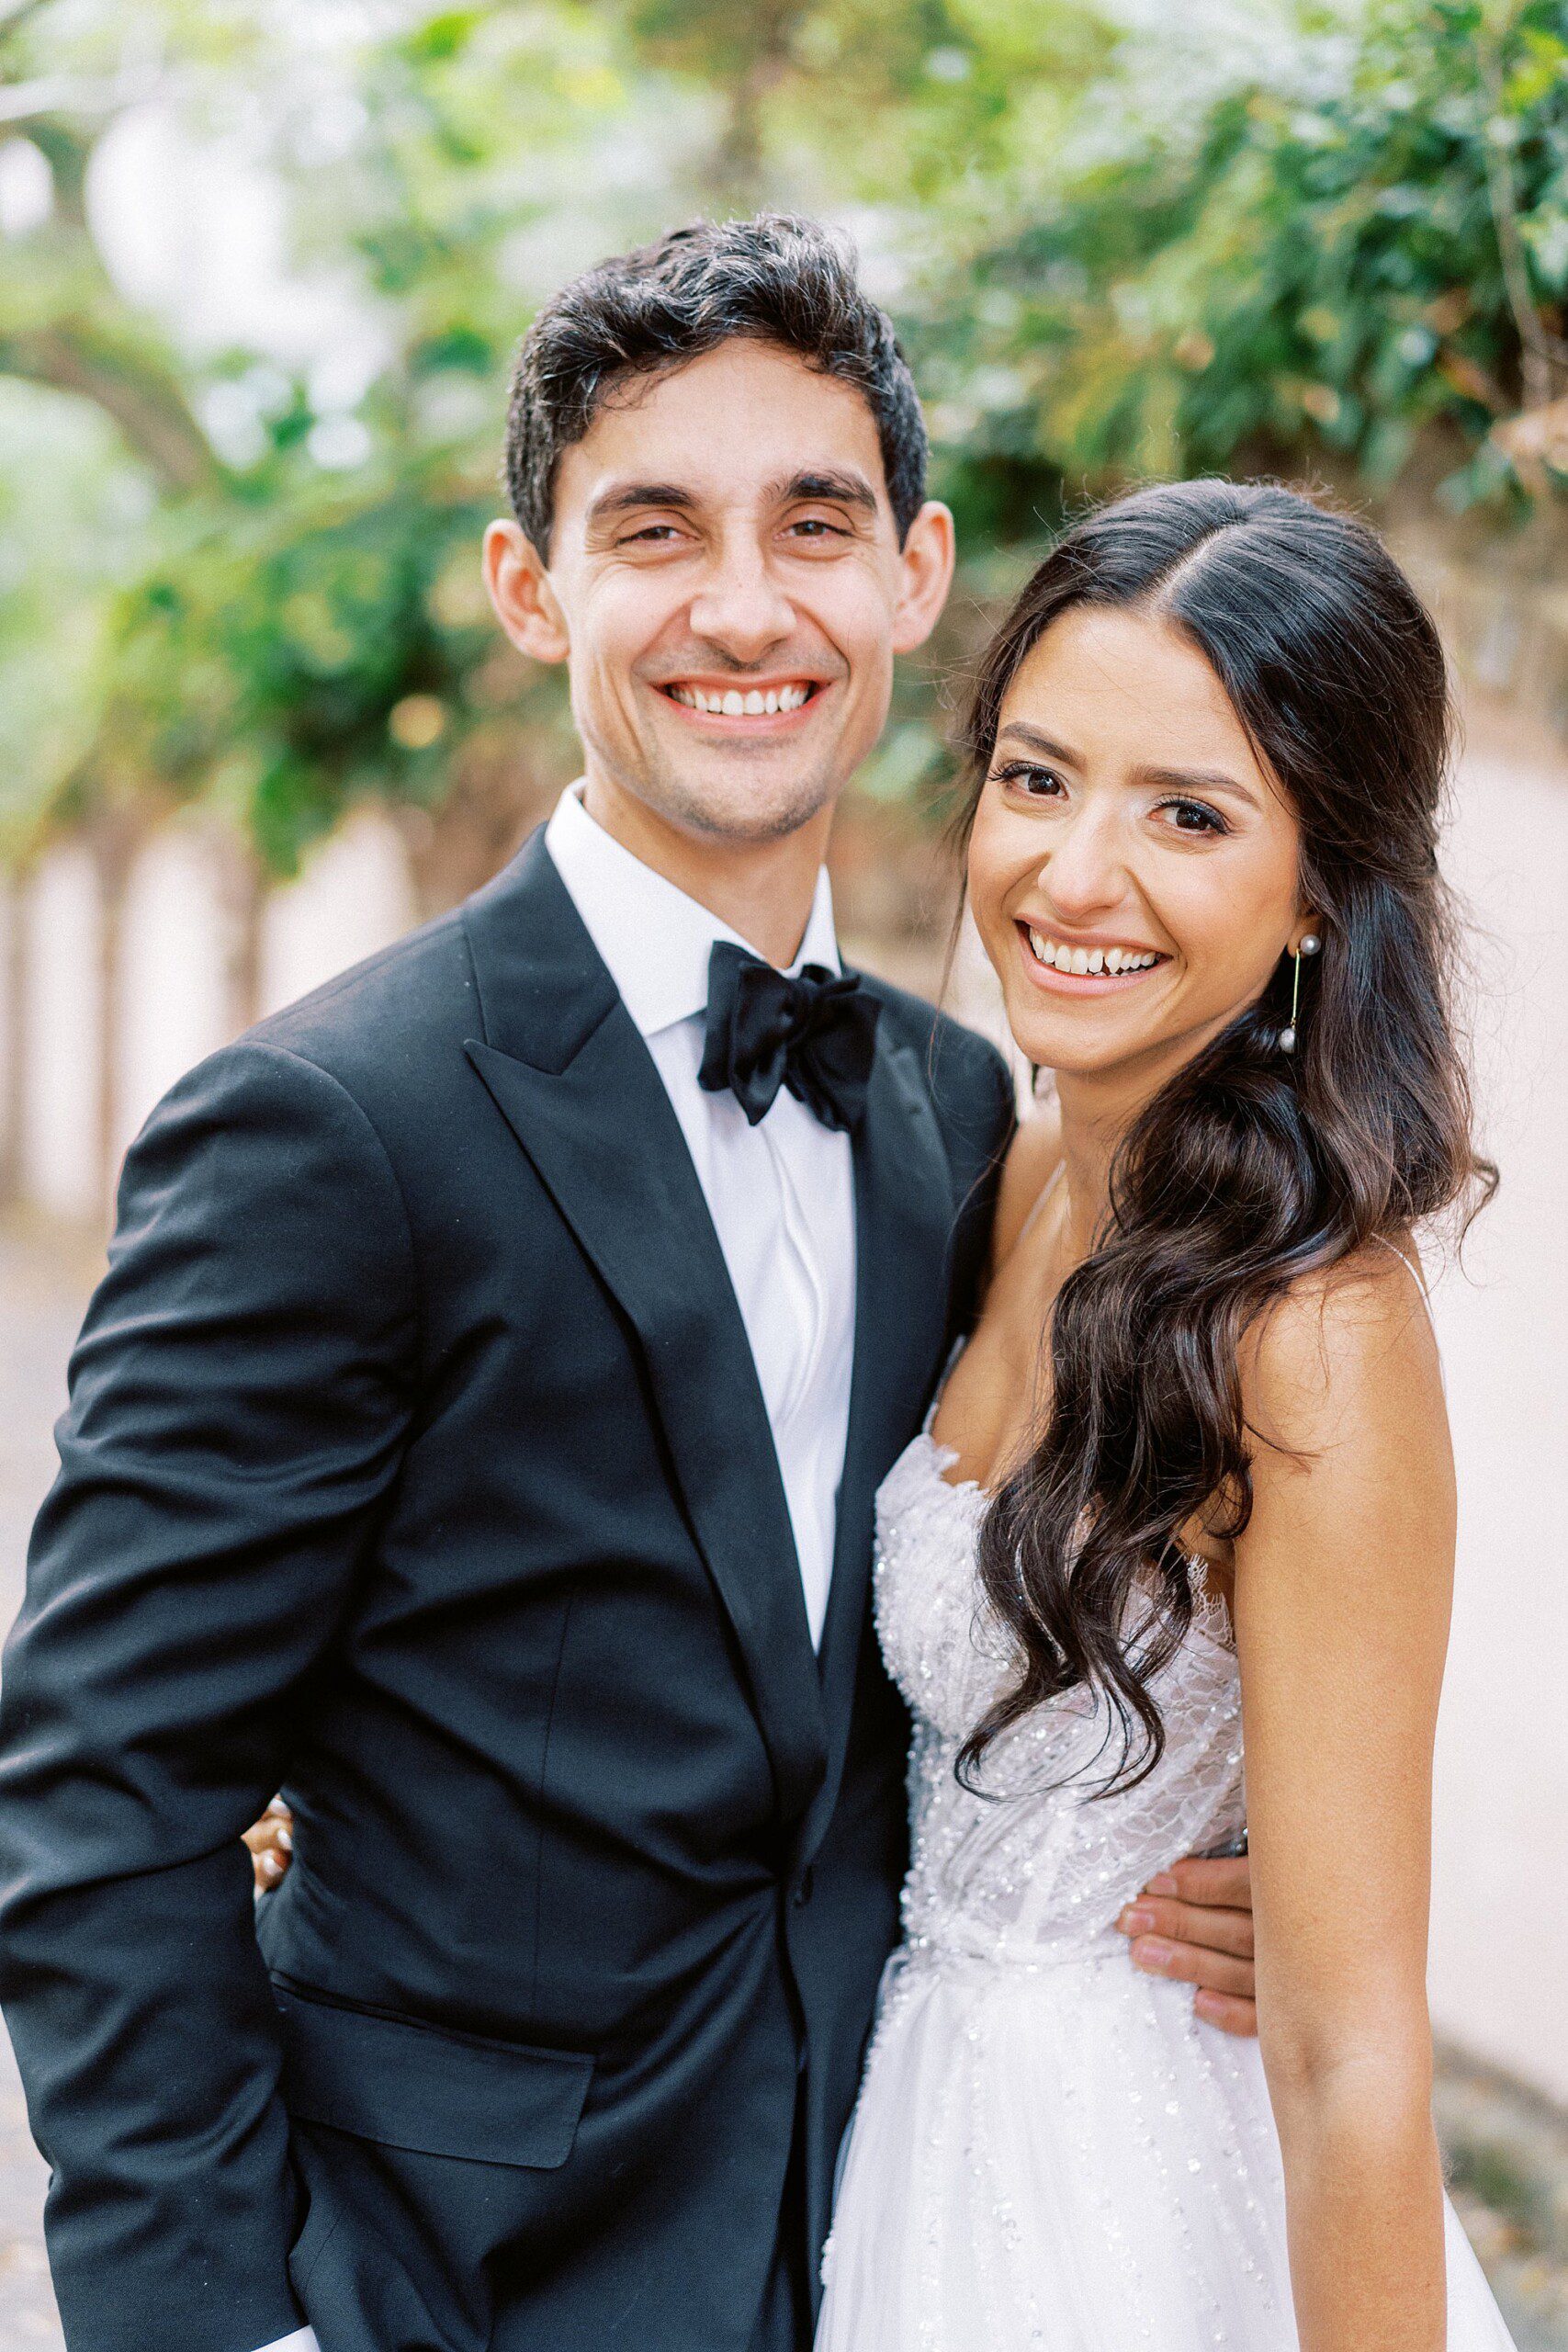 classic portrait of a groom wearing a fitted black tux and a bride wearing a sparkly wedding dress smiling at the camera at Cannon Green